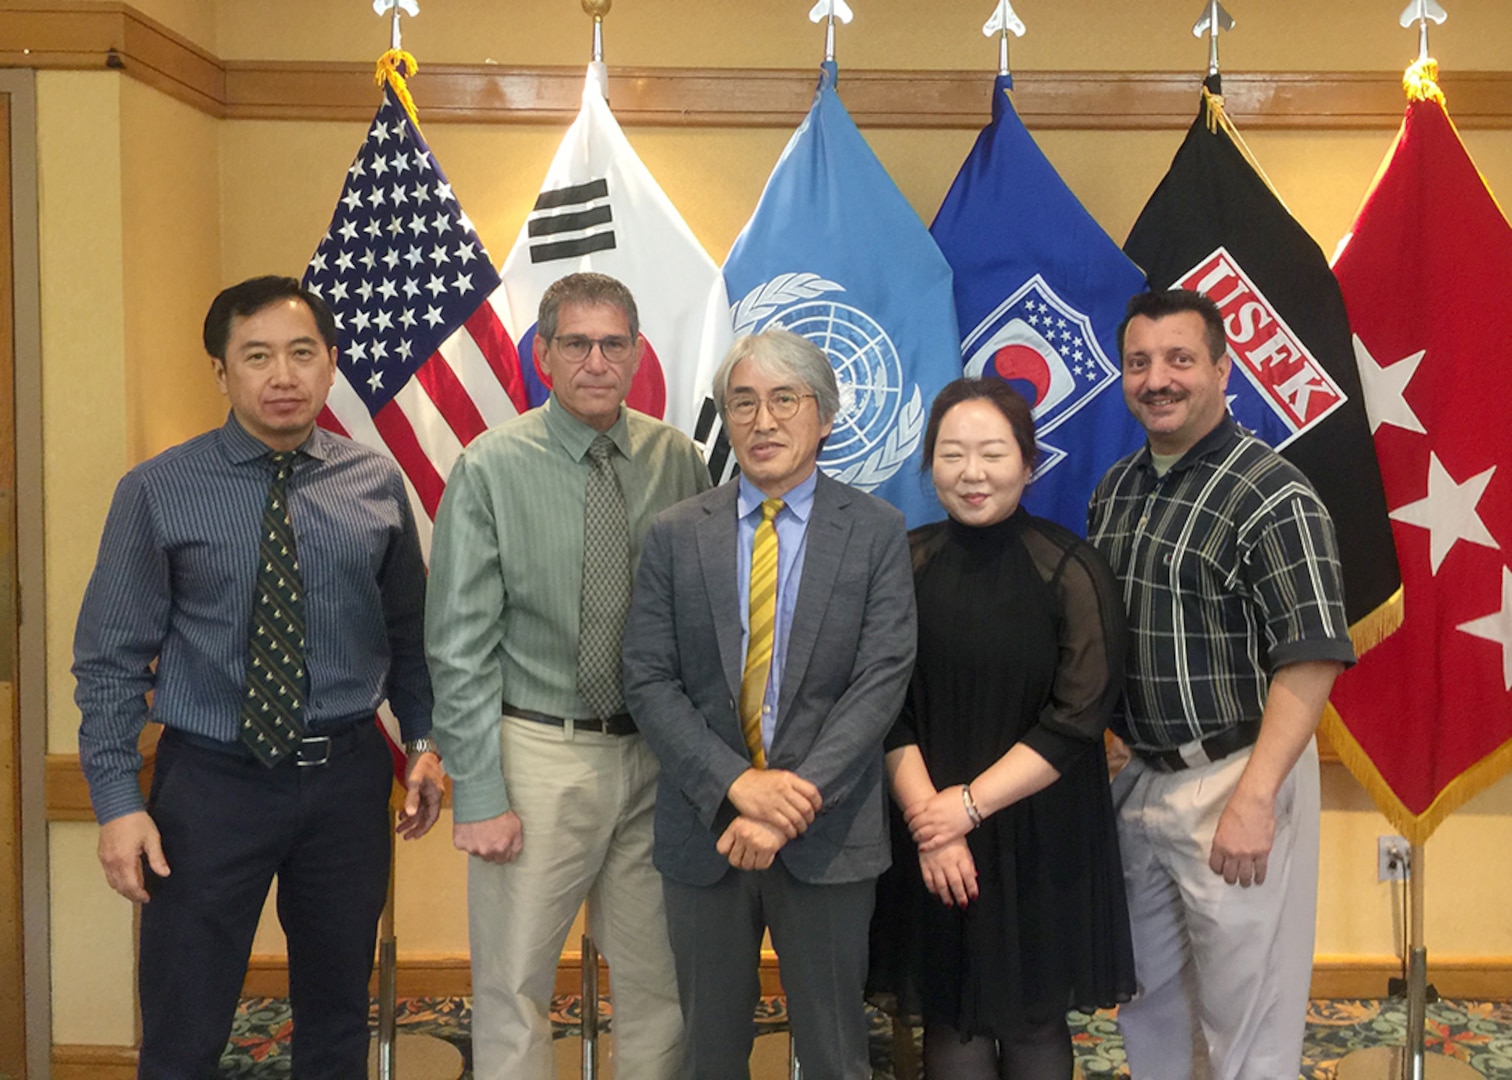 DLA Energy Pacific at Korea employee Kyu Sok Kwak poses with family after awards ceremony